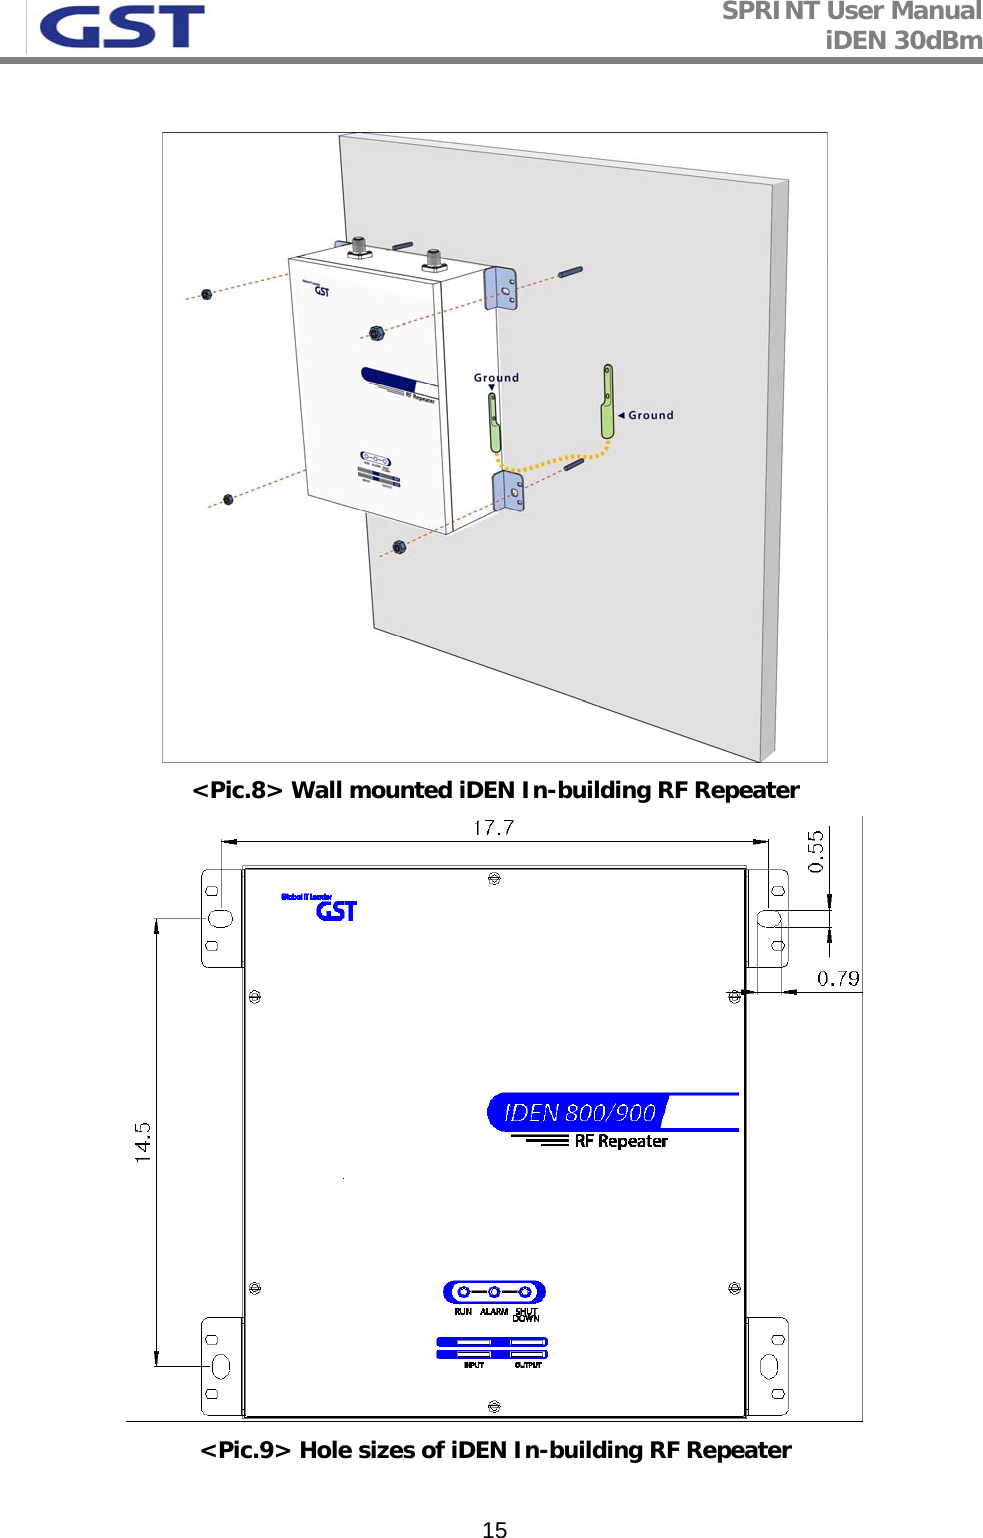 SPRINT User Manual iDEN 30dBm   15  &lt;Pic.8&gt; Wall mounted iDEN In-building RF Repeater    &lt;Pic.9&gt; Hole sizes of iDEN In-building RF Repeater   